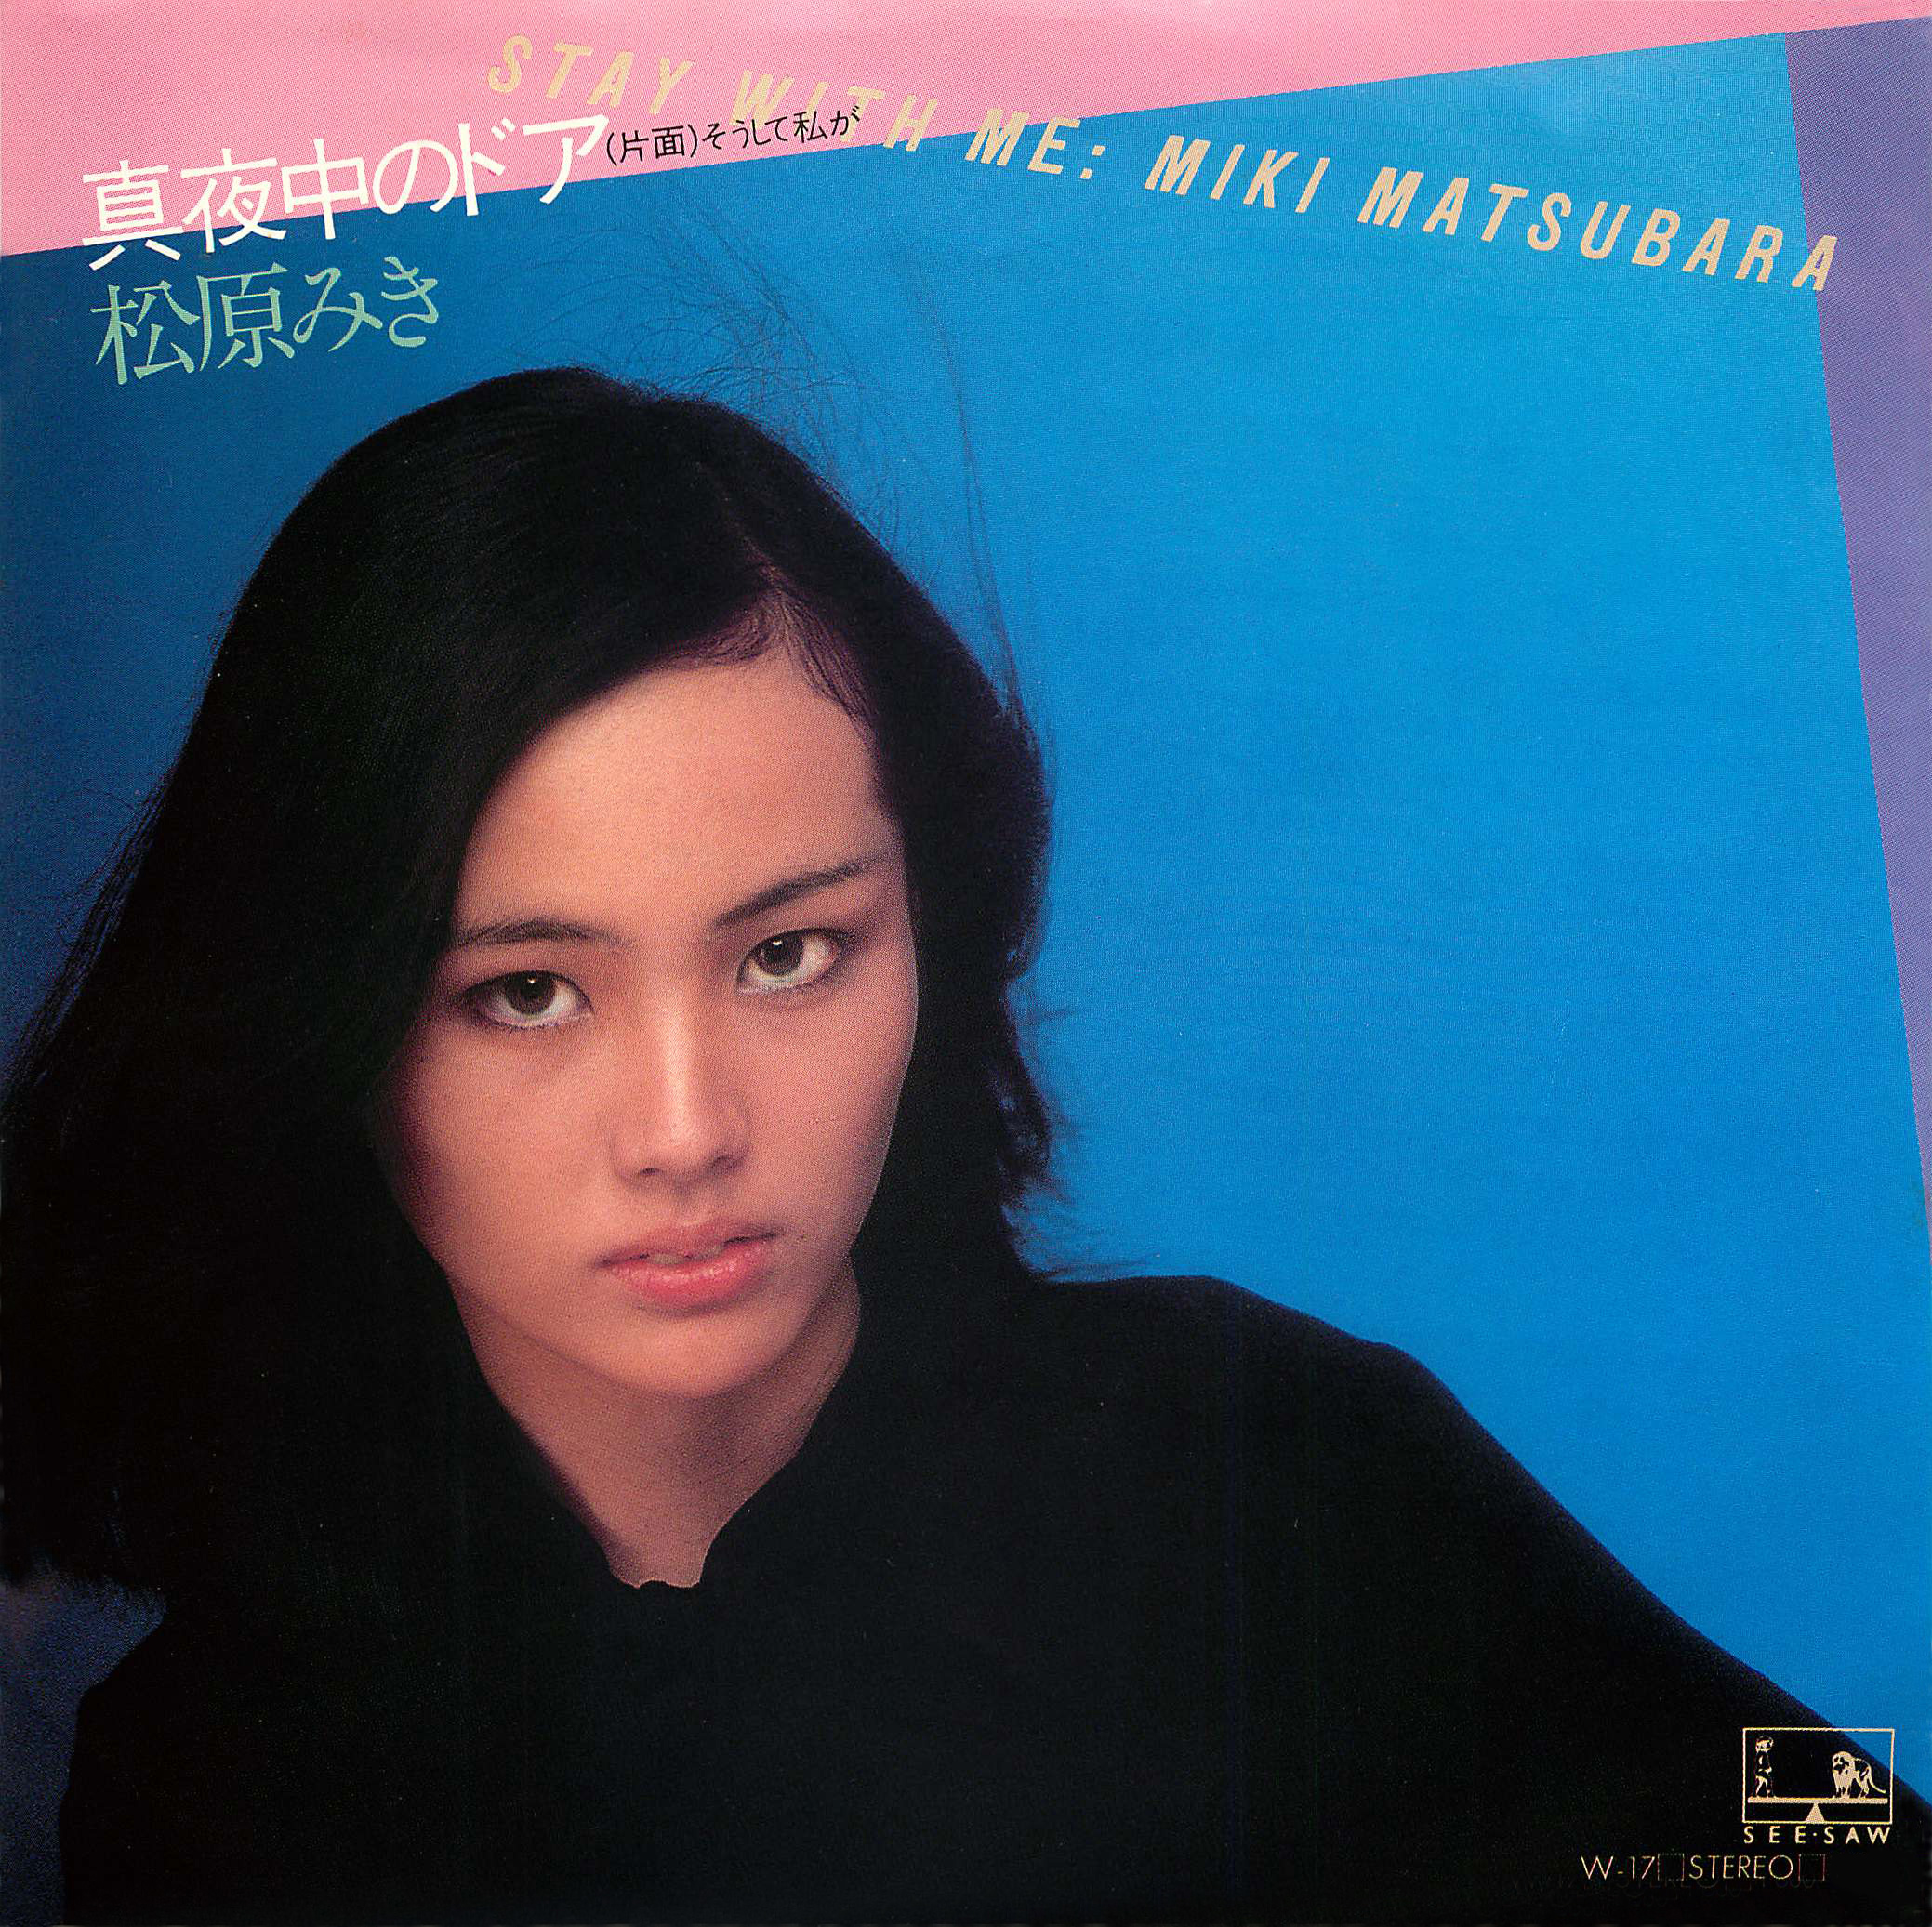 Matsubara Miki (7-inch single Vinyl) "Mayonaka no Door / Stay With Me" Release on March 31st 2021